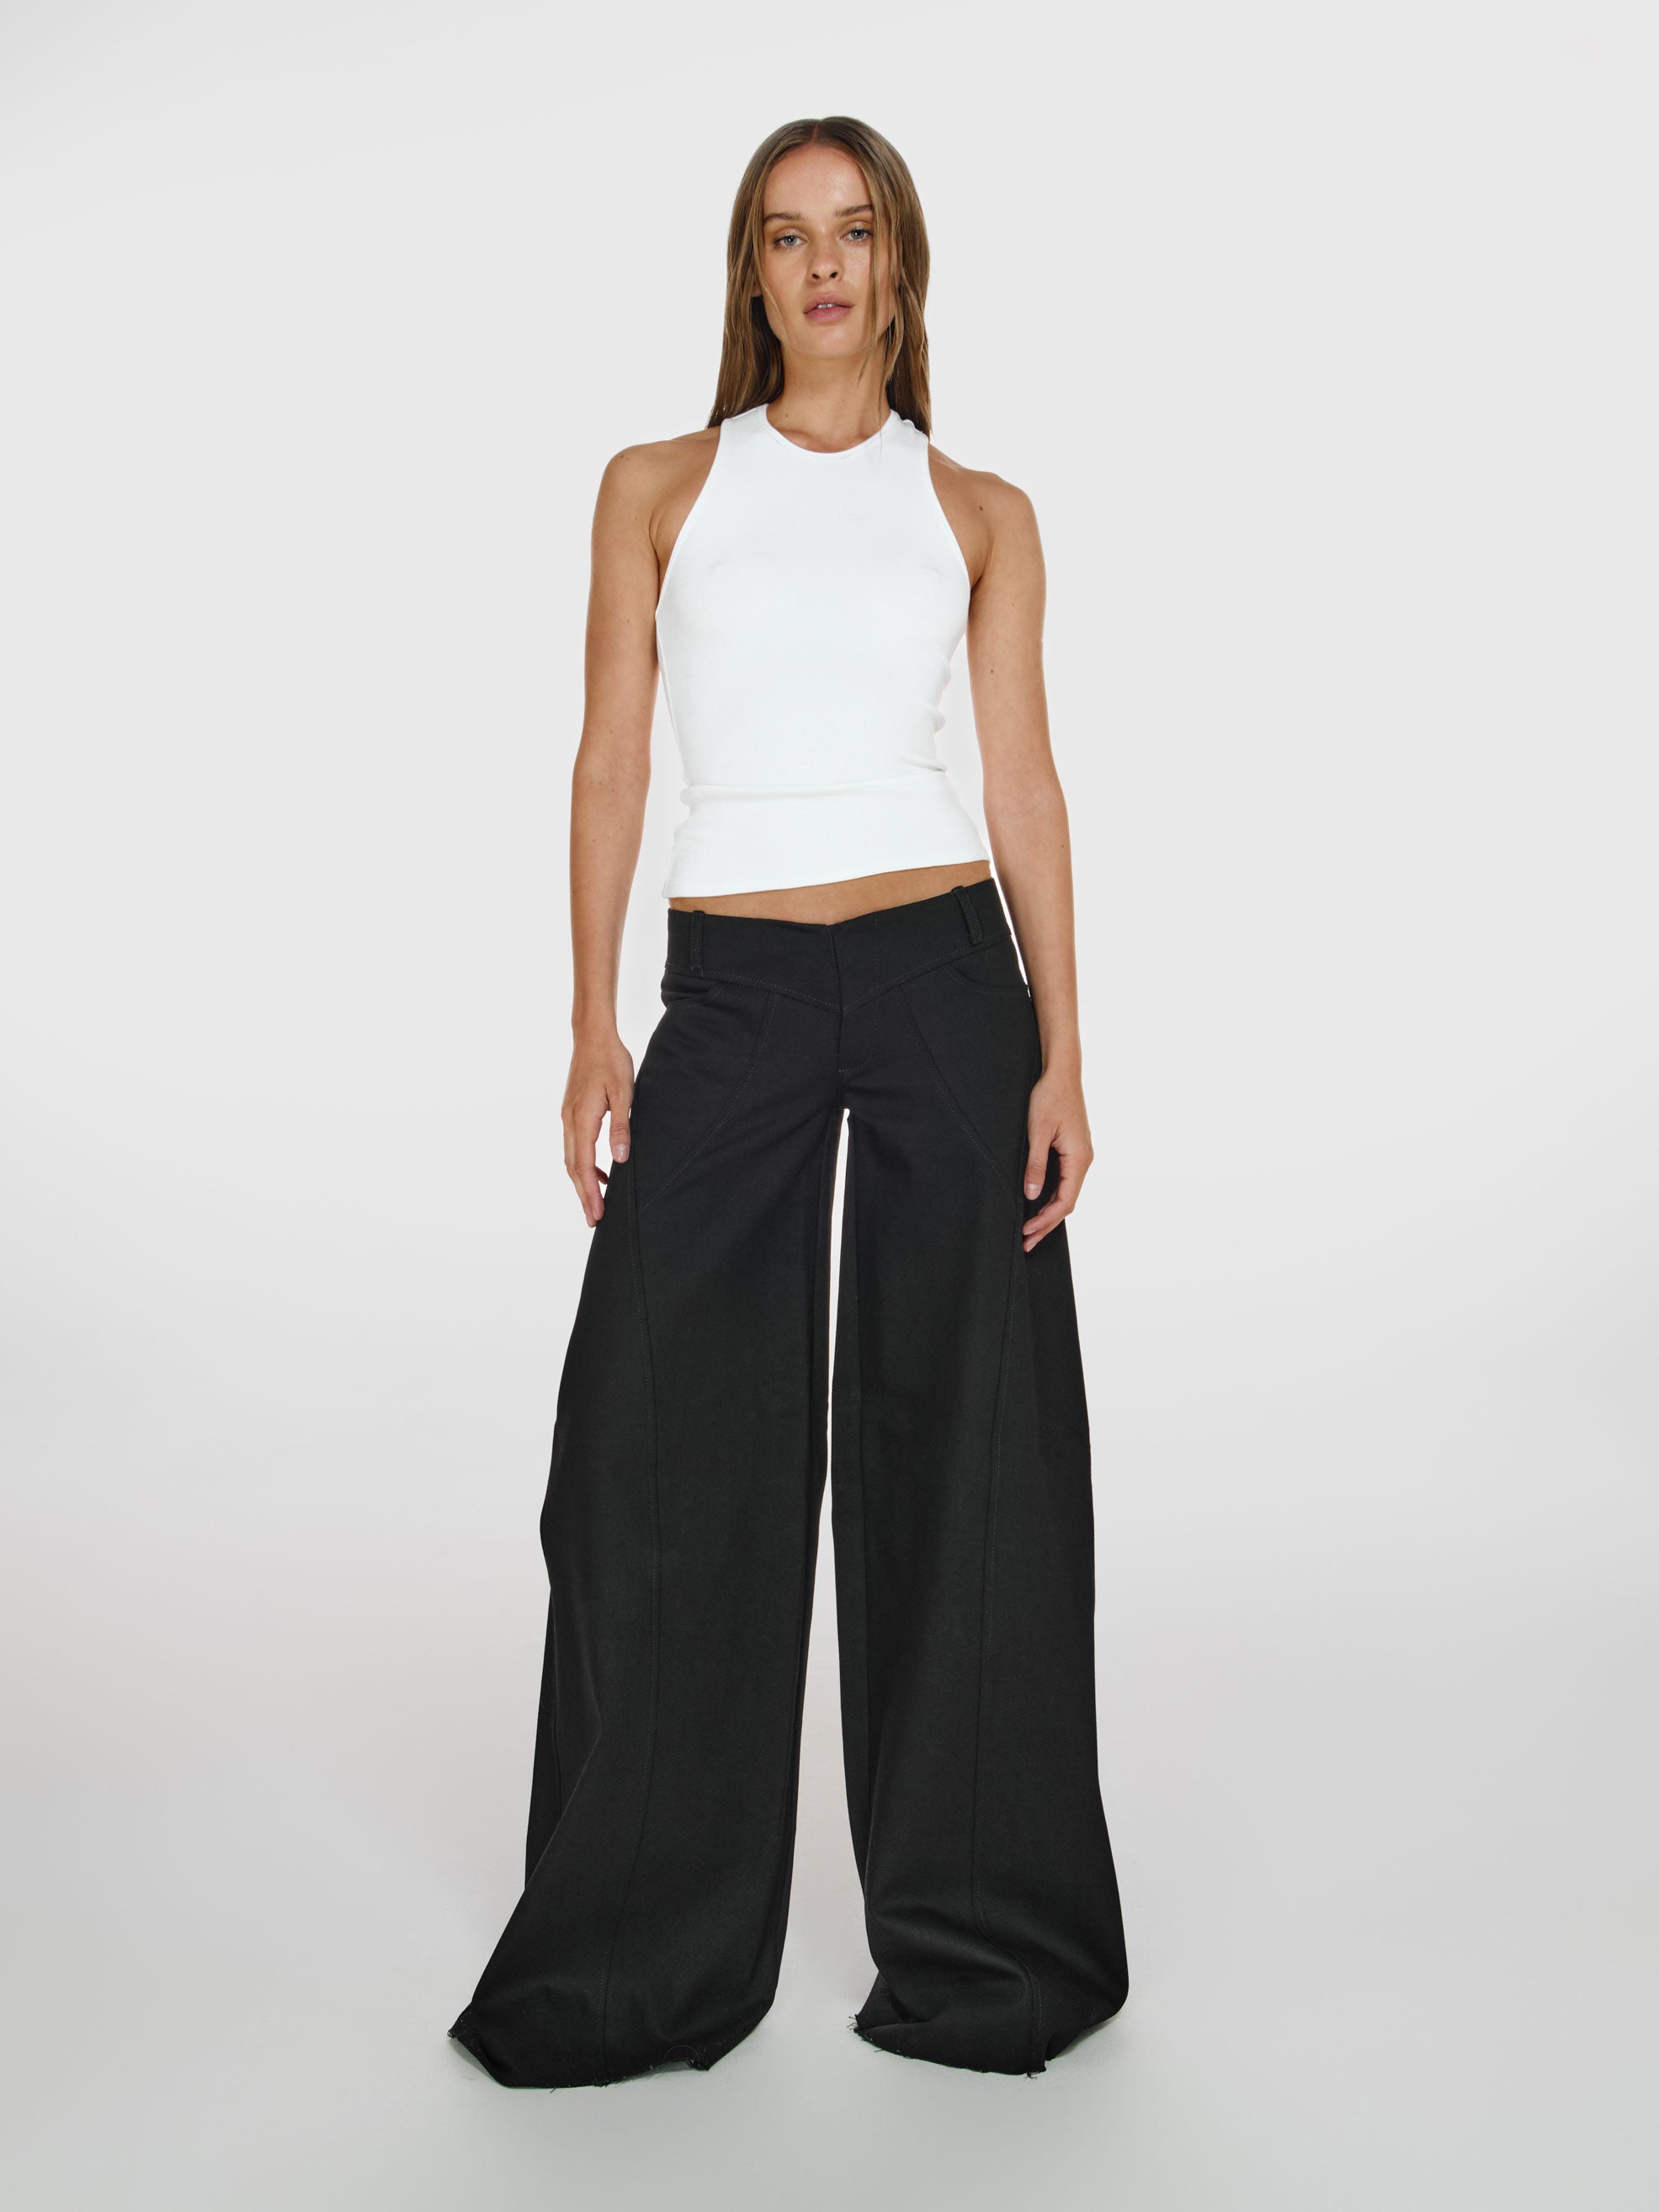 Full shot of a girl in a white viscose tank top and black wide leg jeans with low rise